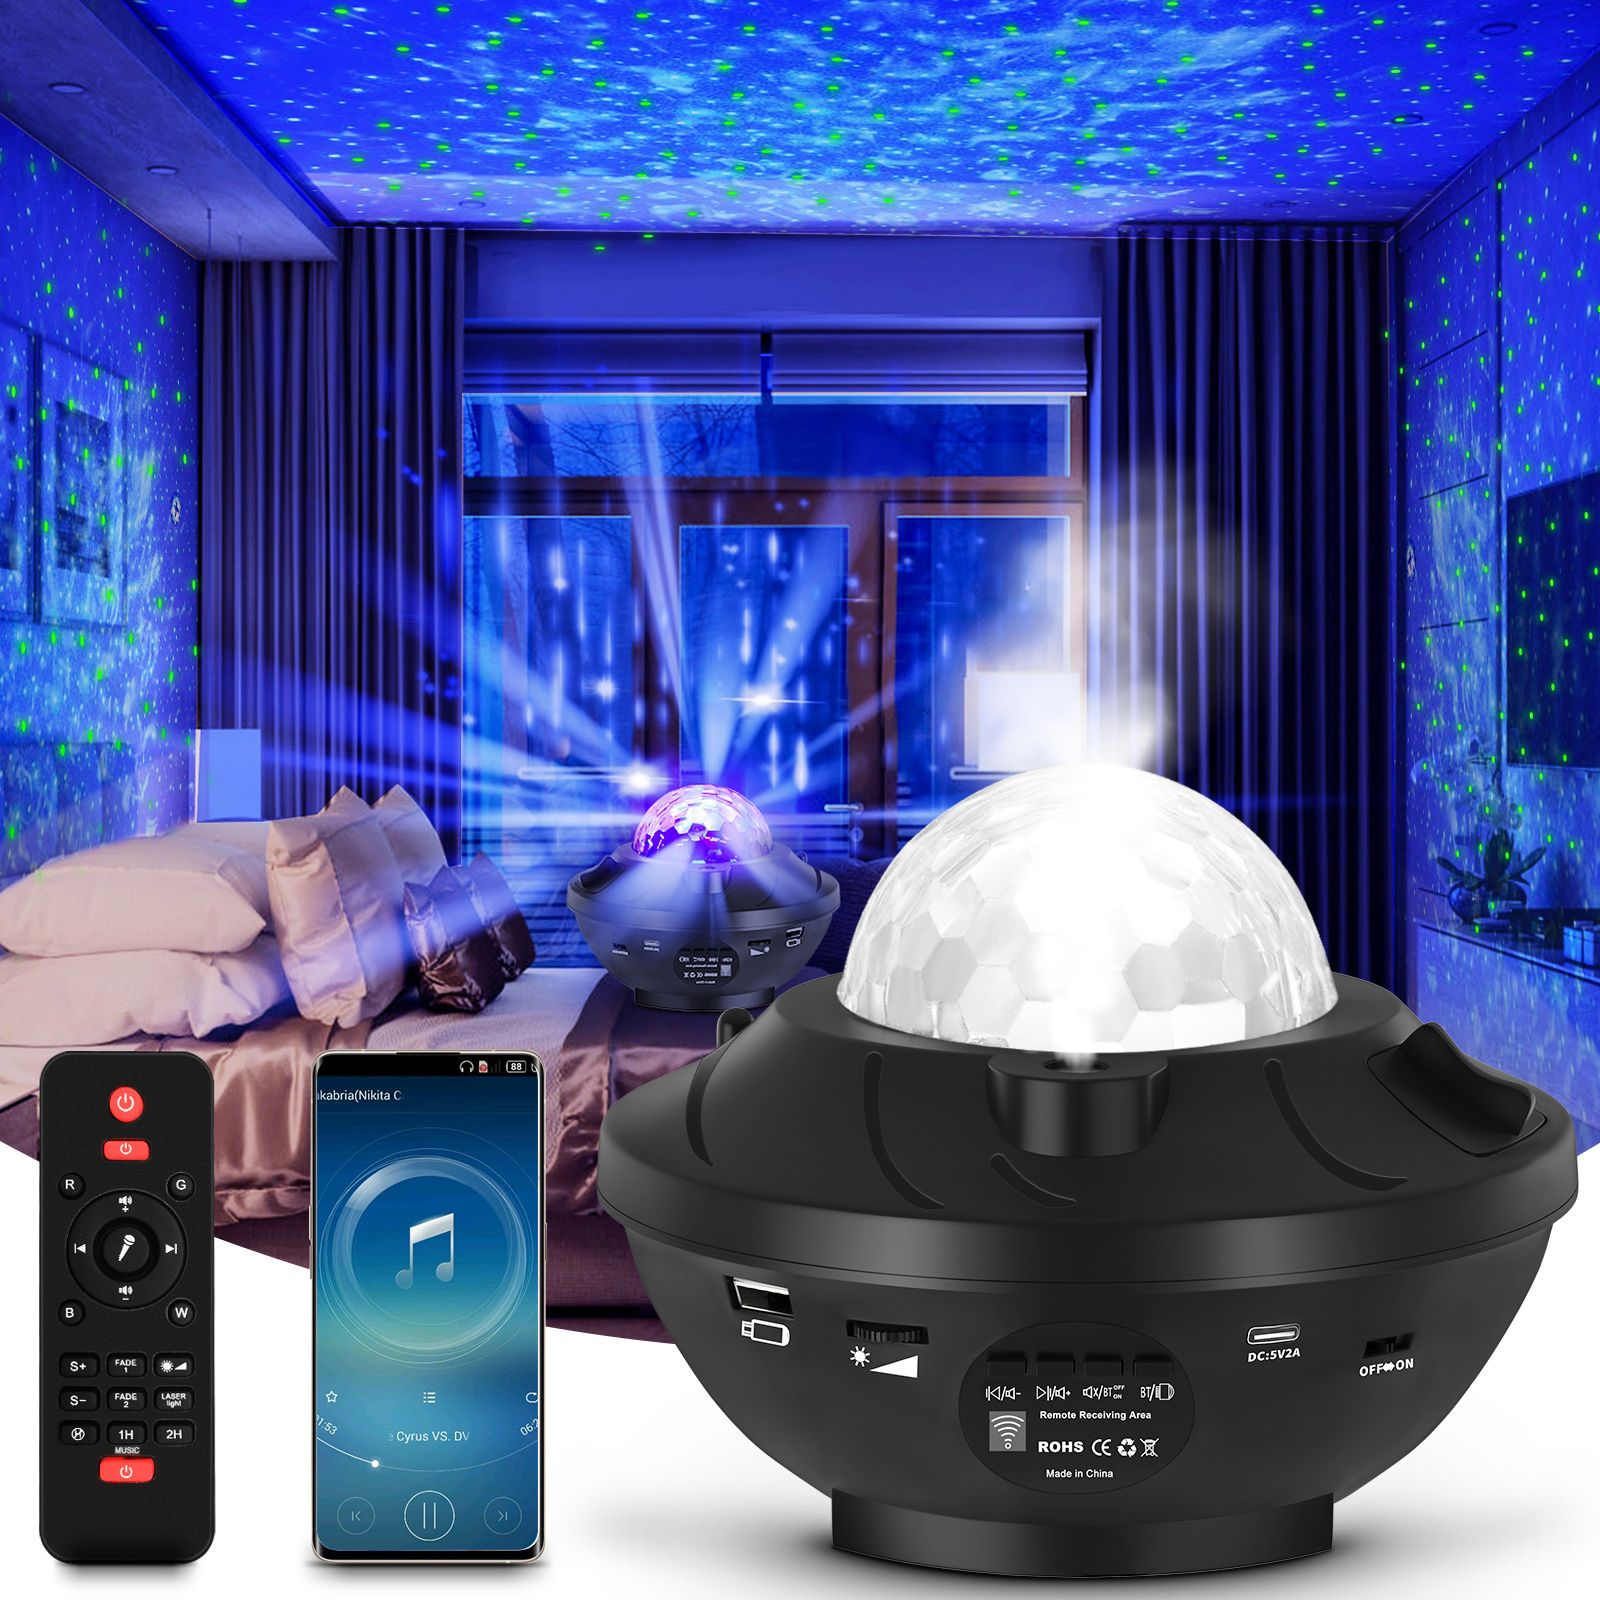 Star Projector Night Light, Star Light Projector for Bedroom,Galaxy Lighting with Bluetooth Music Speaker Timer for Bedroom Decoration Kids Party Birthday Gifts for Girls Boys